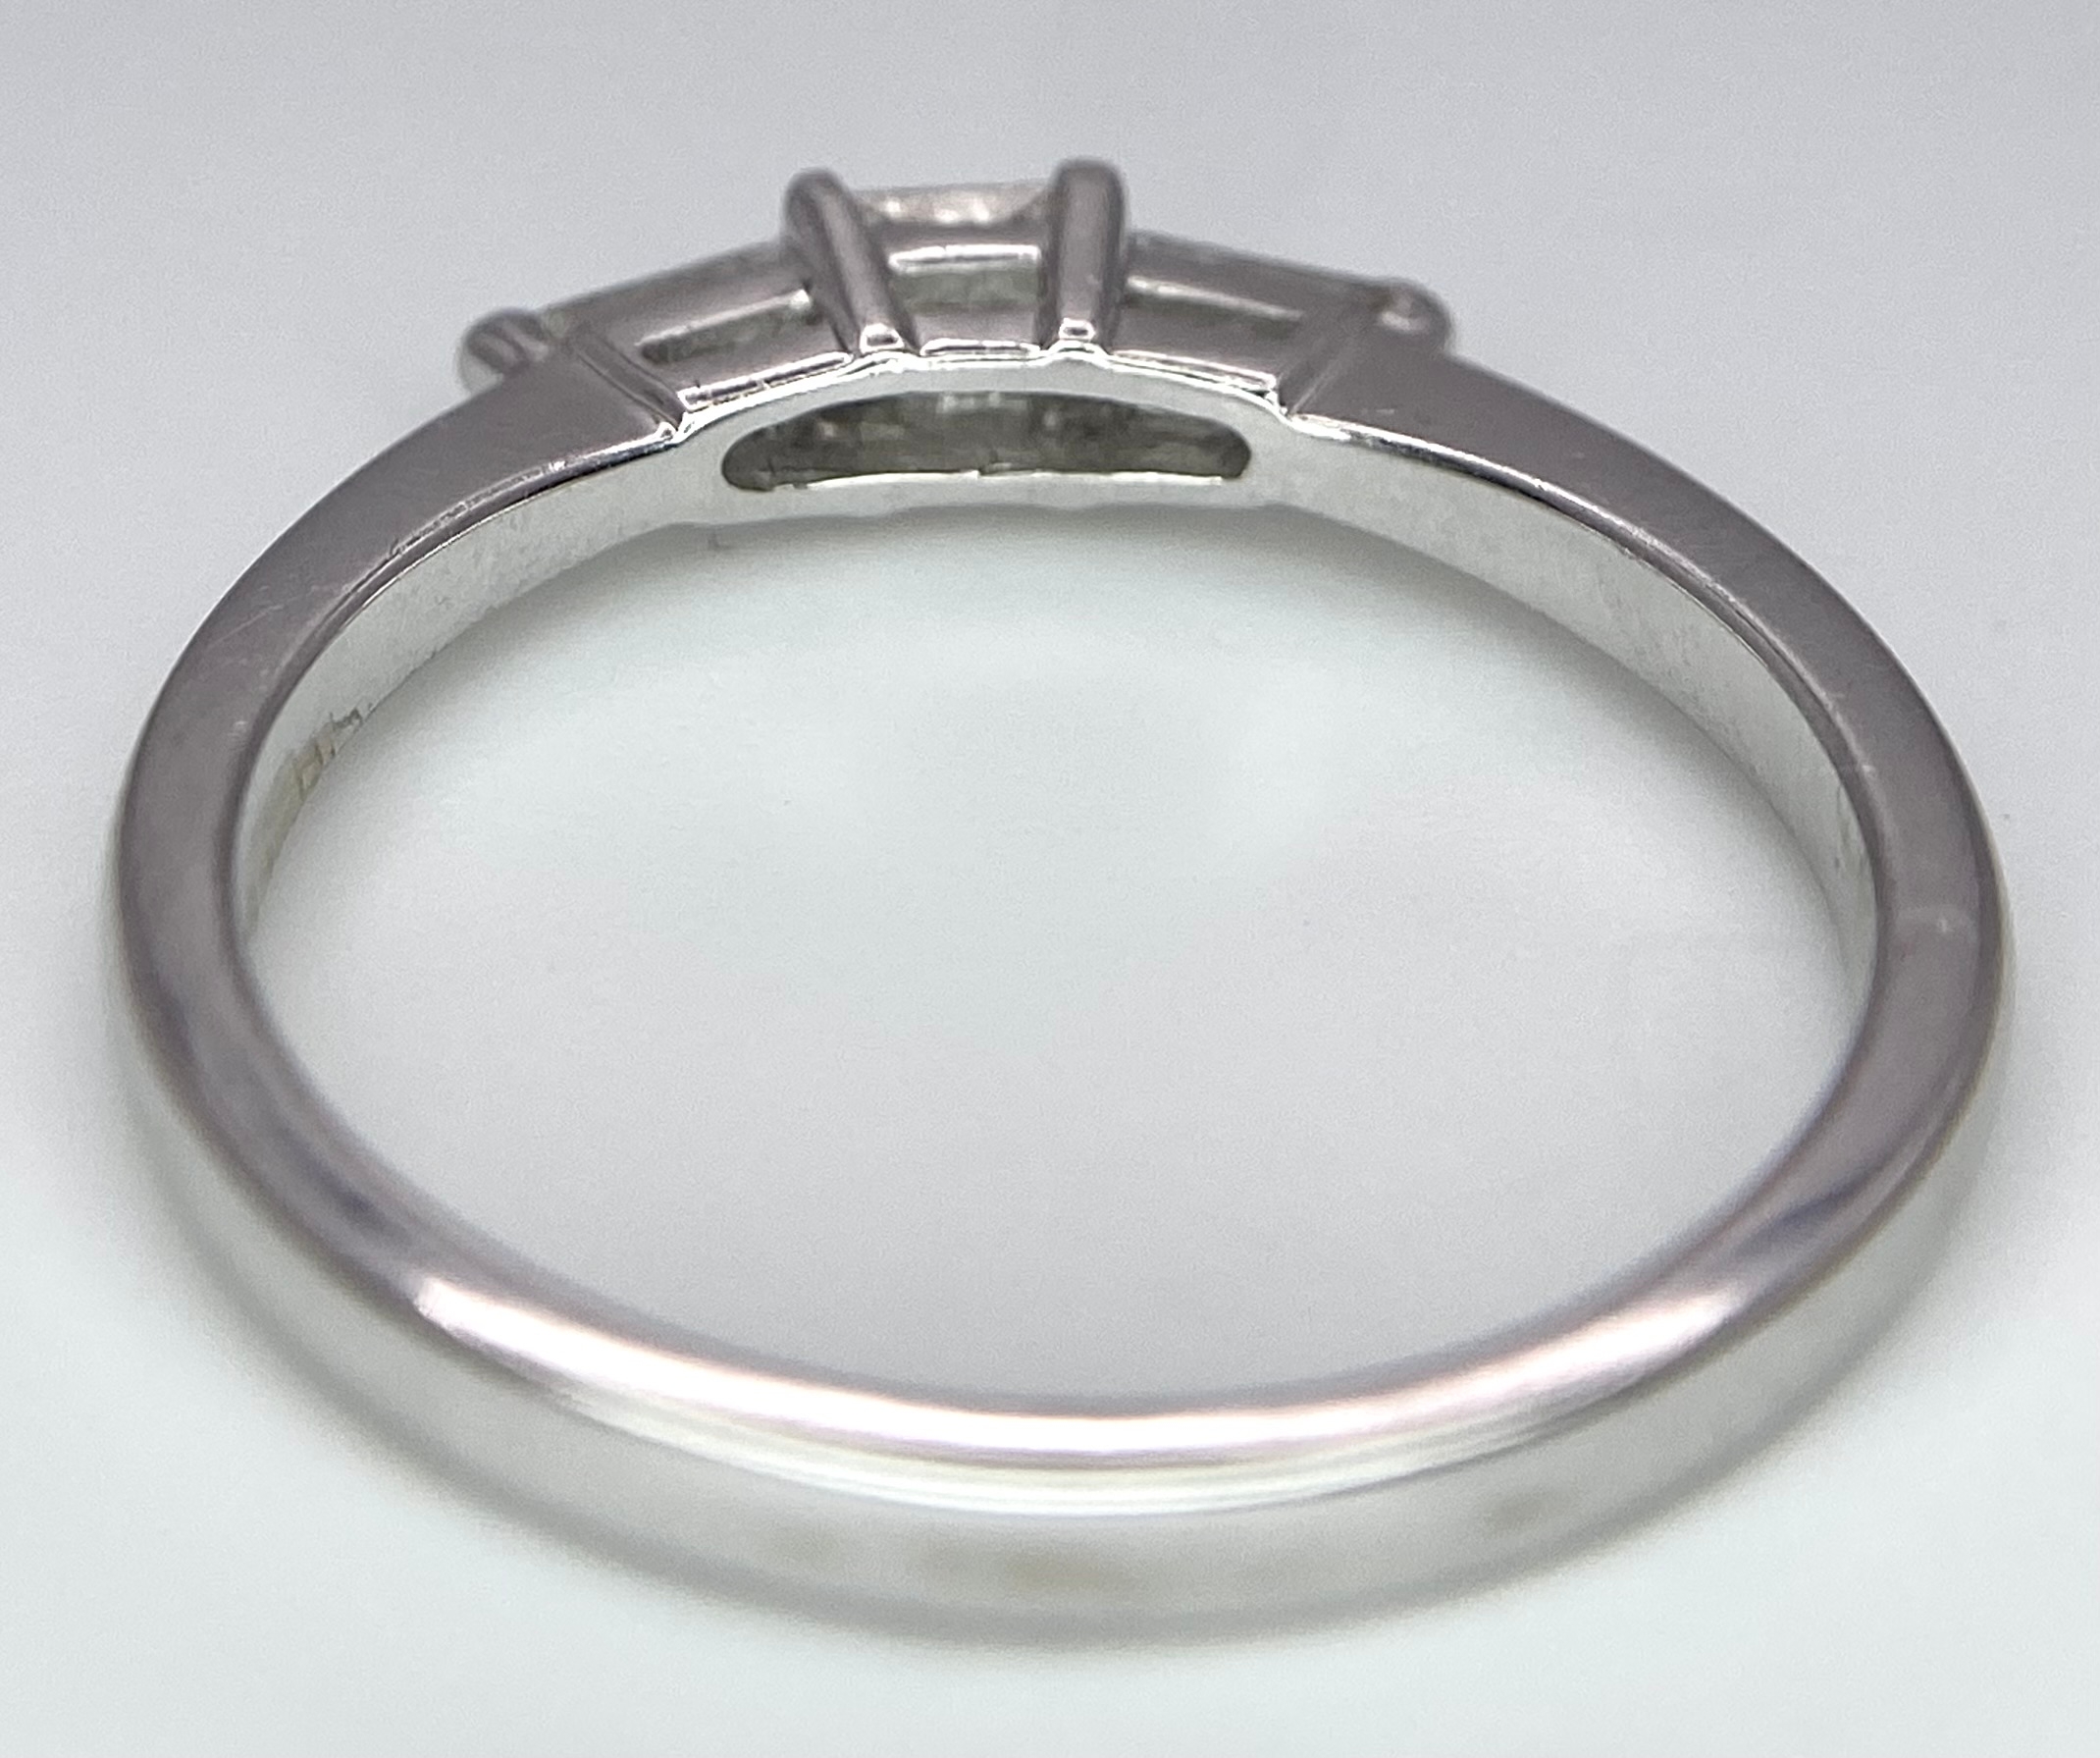 AN 18K WHITE GOLD, DIAMOND 3 STONE RING - PRINCESS CUT CENTRE WITH A TAPPERED BAGUETTE DIAMOND - Image 4 of 7